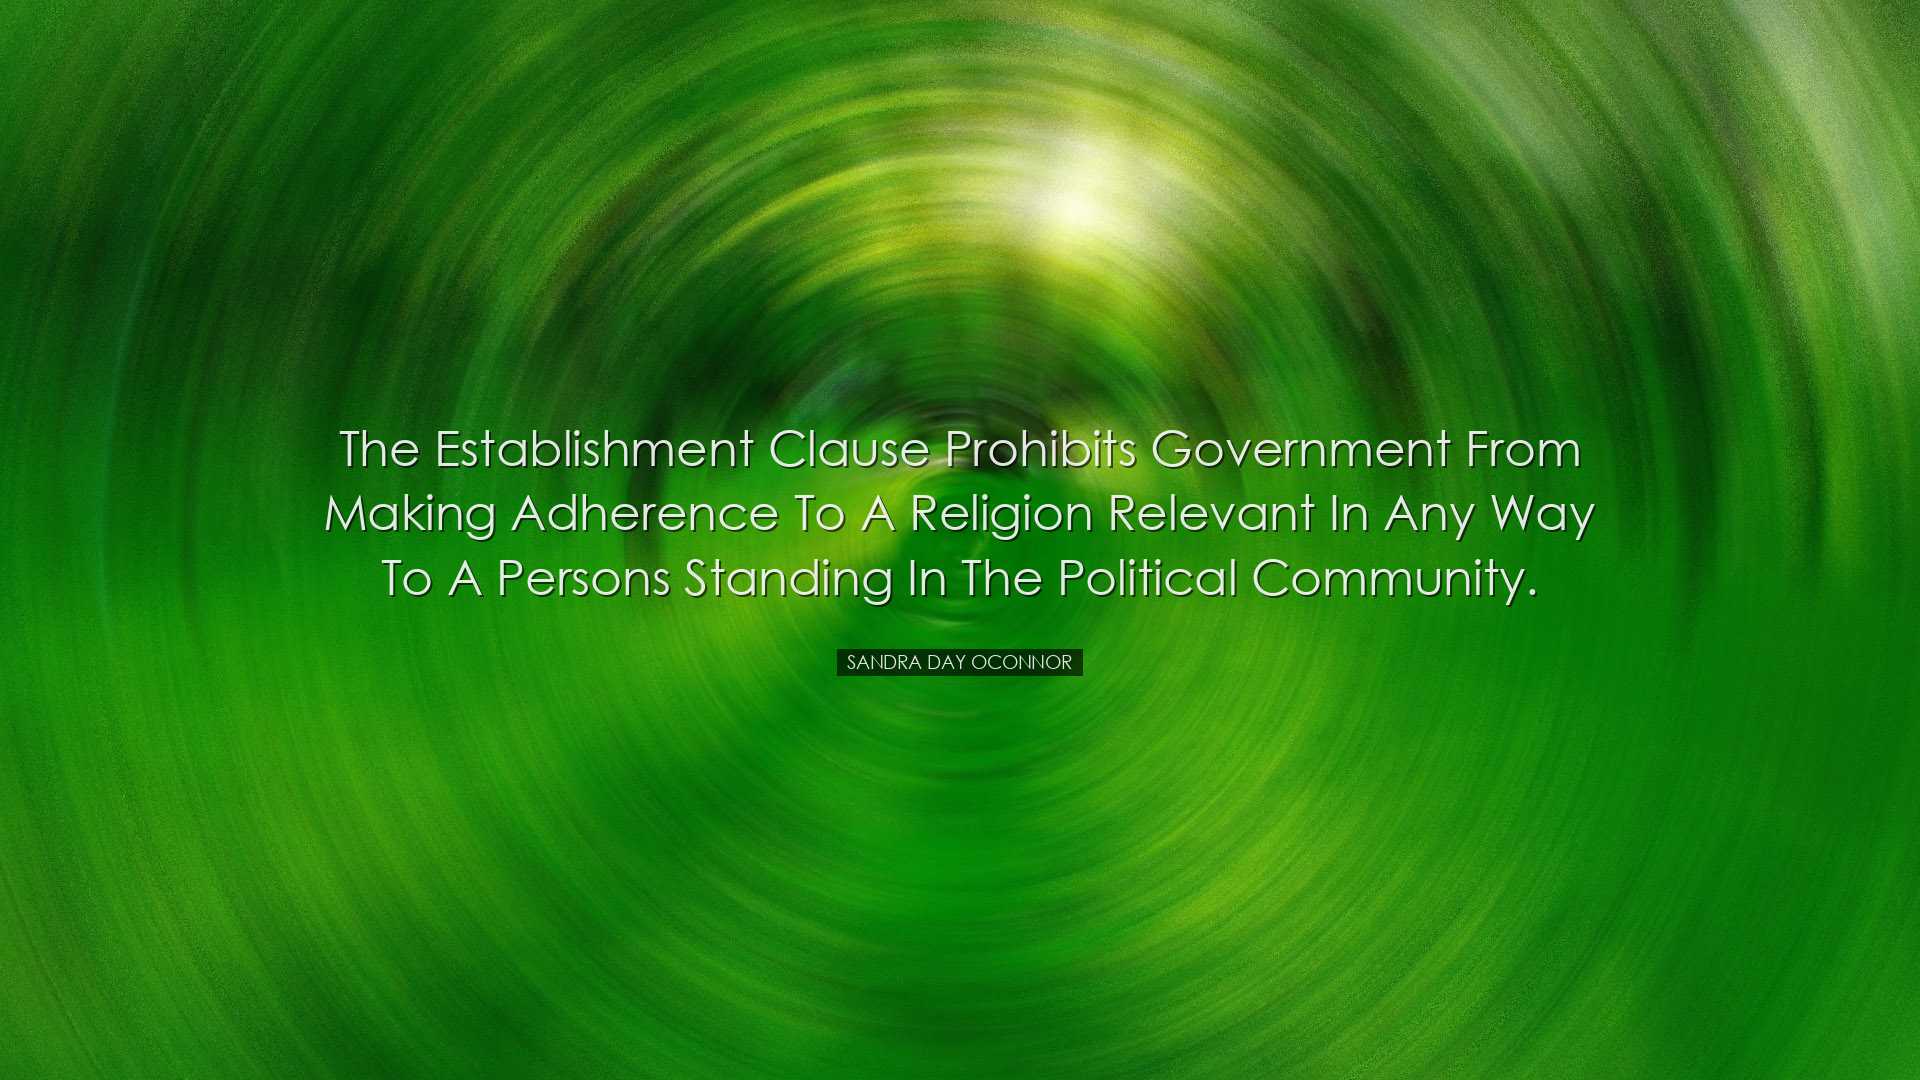 The Establishment Clause prohibits government from making adherenc